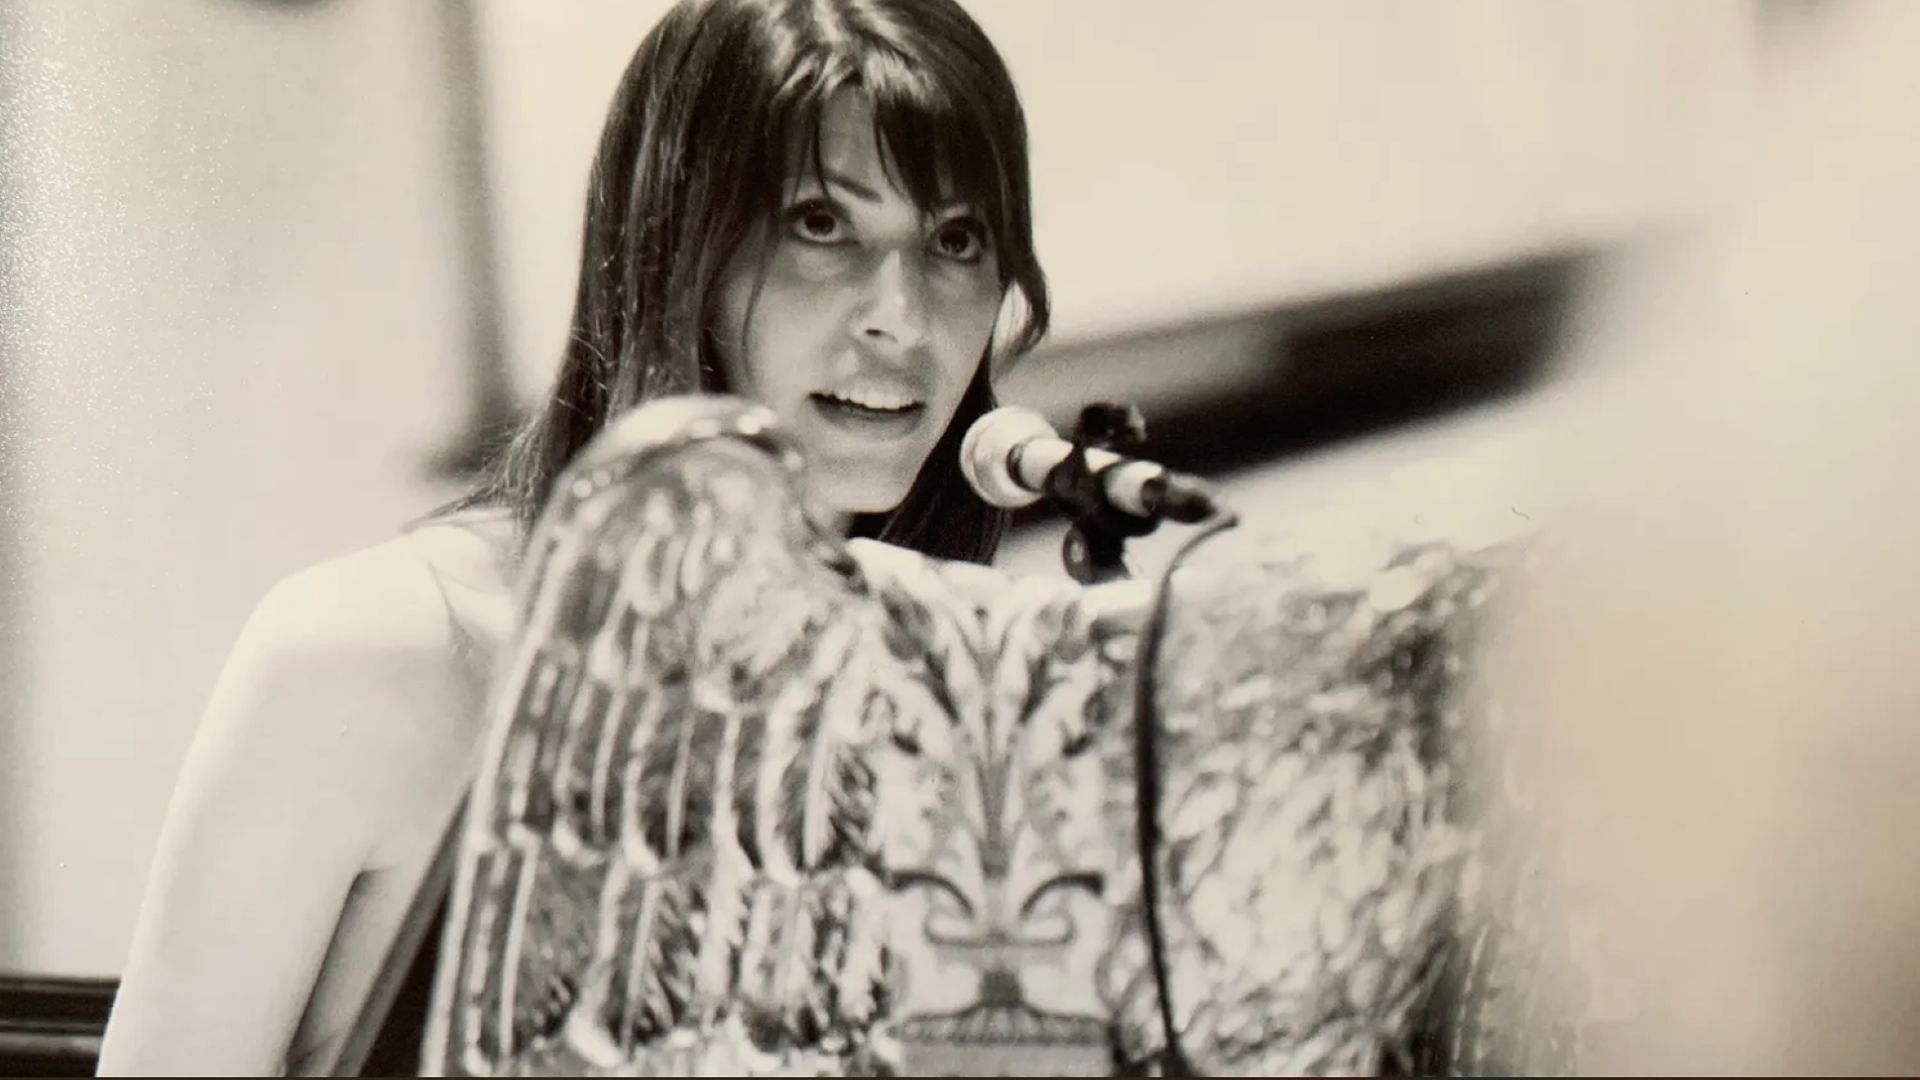 A still of Jennifer Dulos (Image via Carrie Luft and The Farber Family)